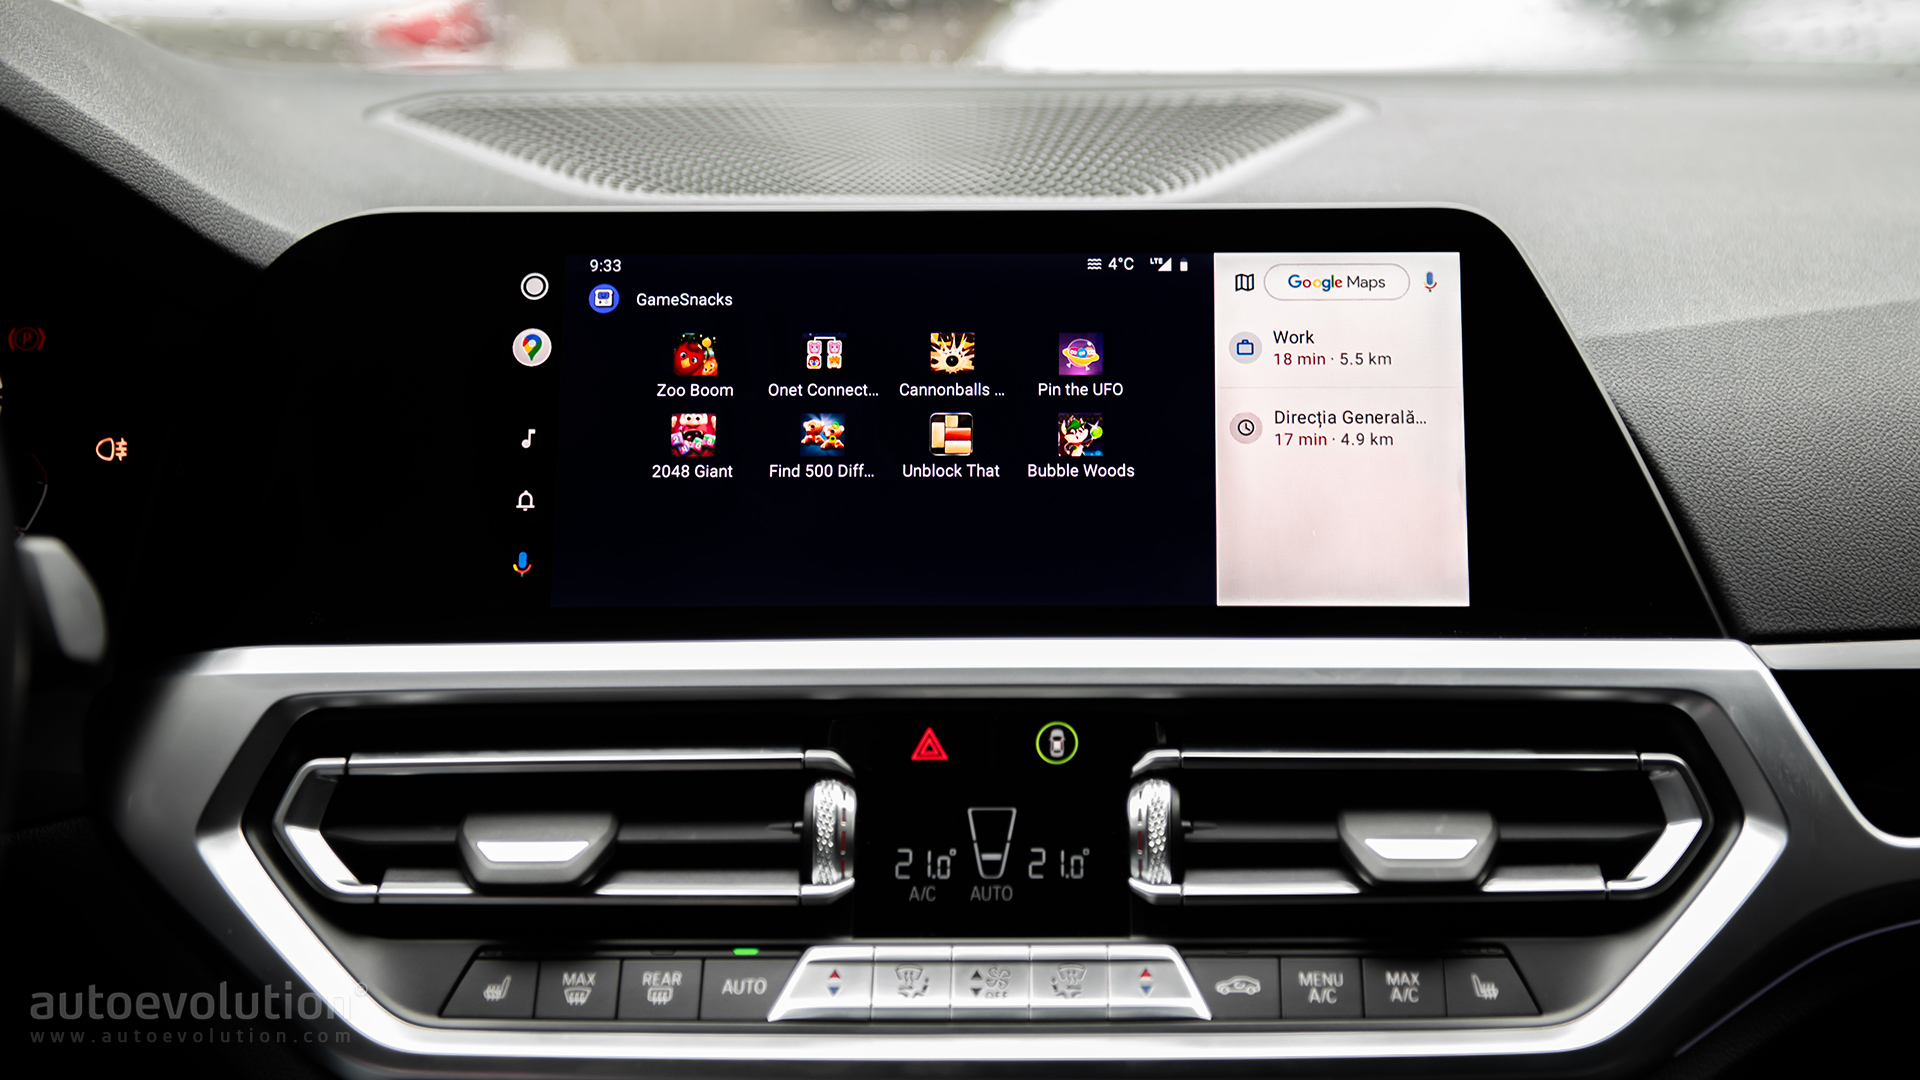 The GameSnacks collection returns to Android Auto with a simple trick